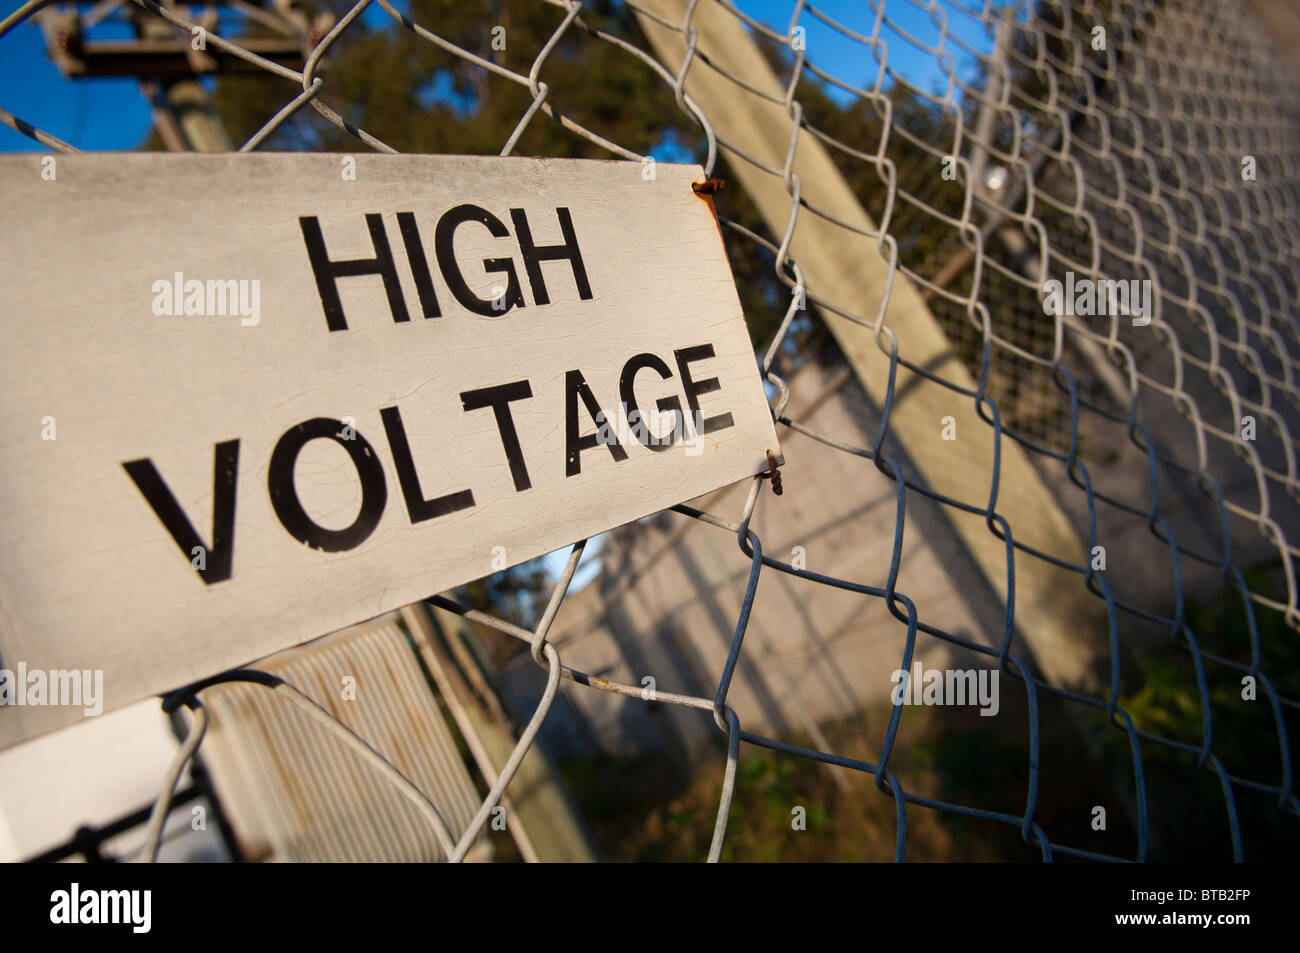 High voltage sign is aged on a wire (cyclone) fence Stock Photo